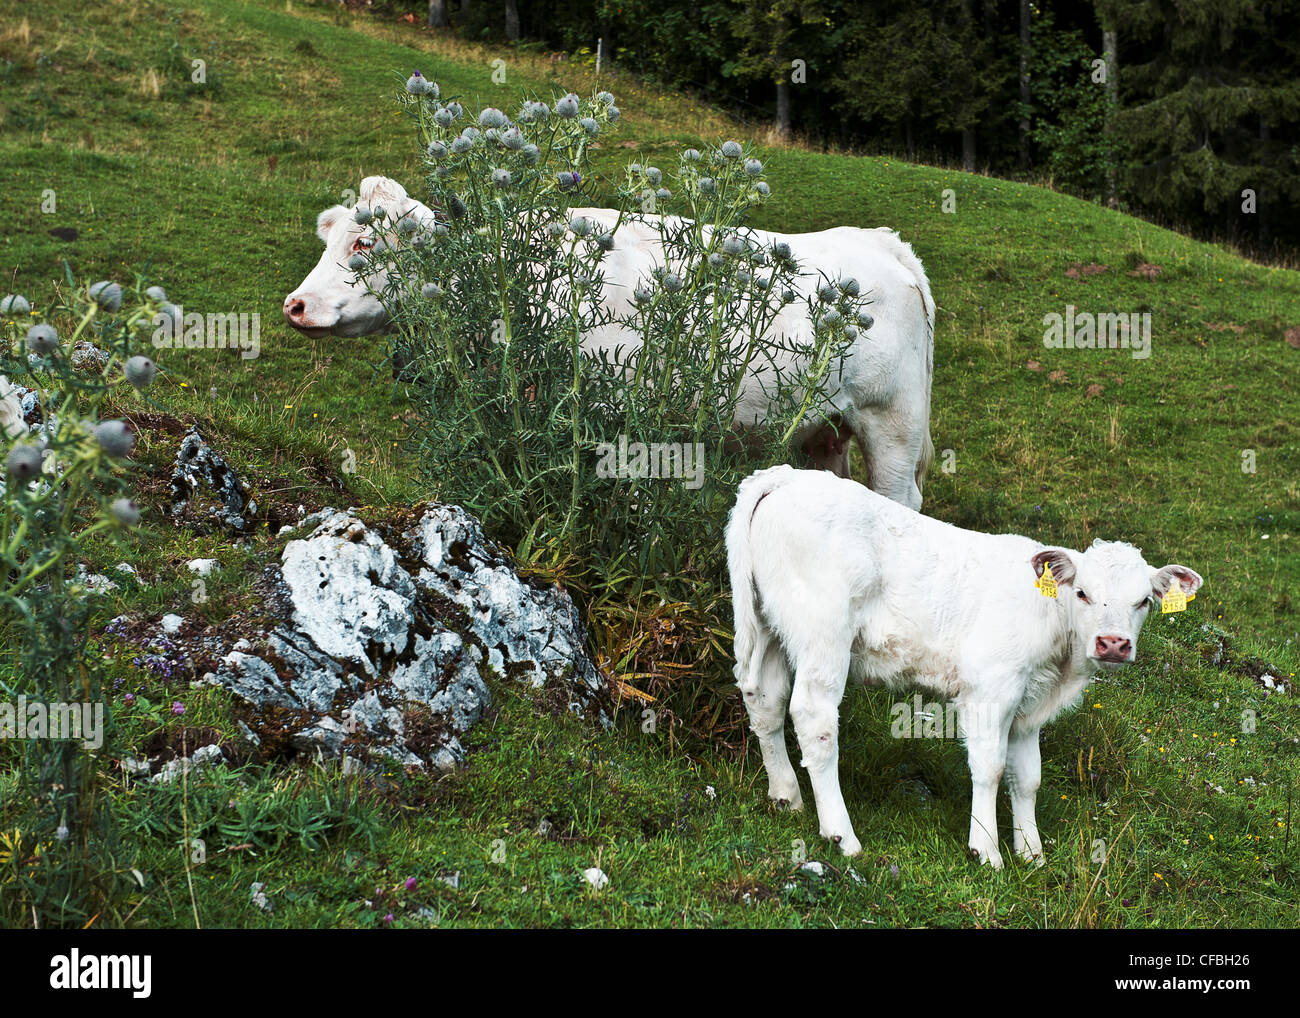 Jura, cattle, calf, canton Solothurn, cow, agriculture, farming, white, Milchkuh, nature, Oberes Brüggli, rind, Switzerland, whi Stock Photo